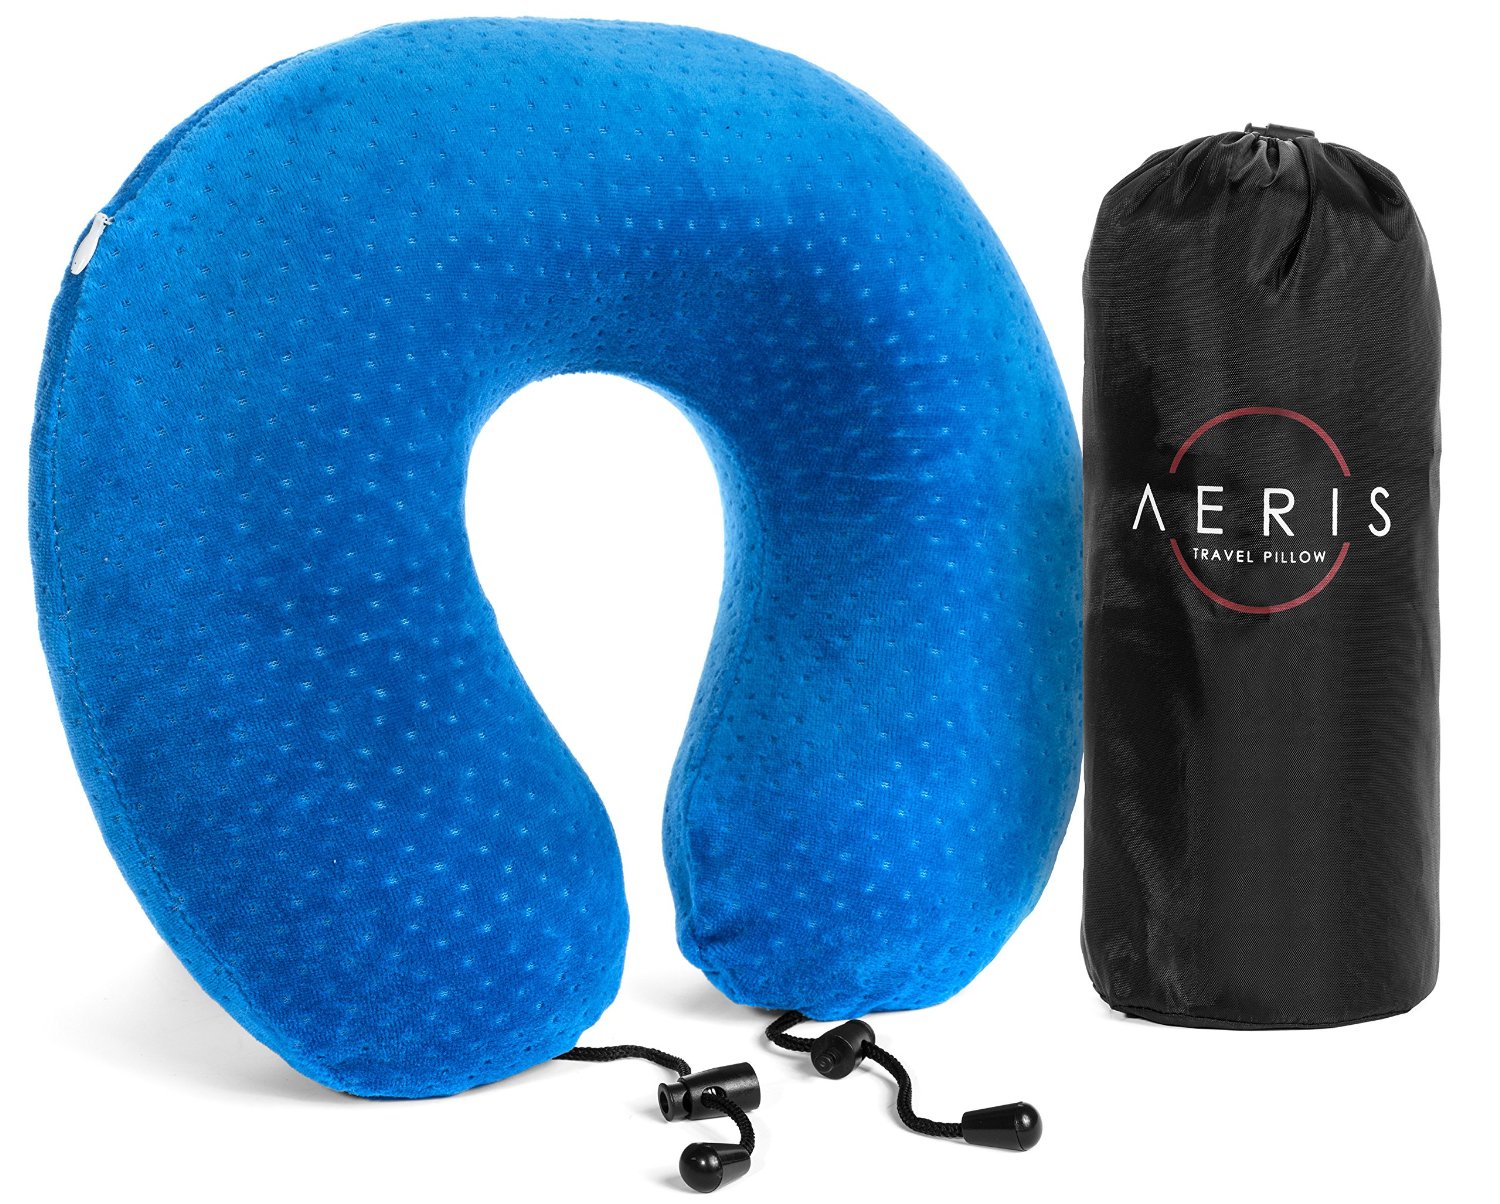 5 Best Inflatable On Air Neck Pillow - Give you optimal neck support